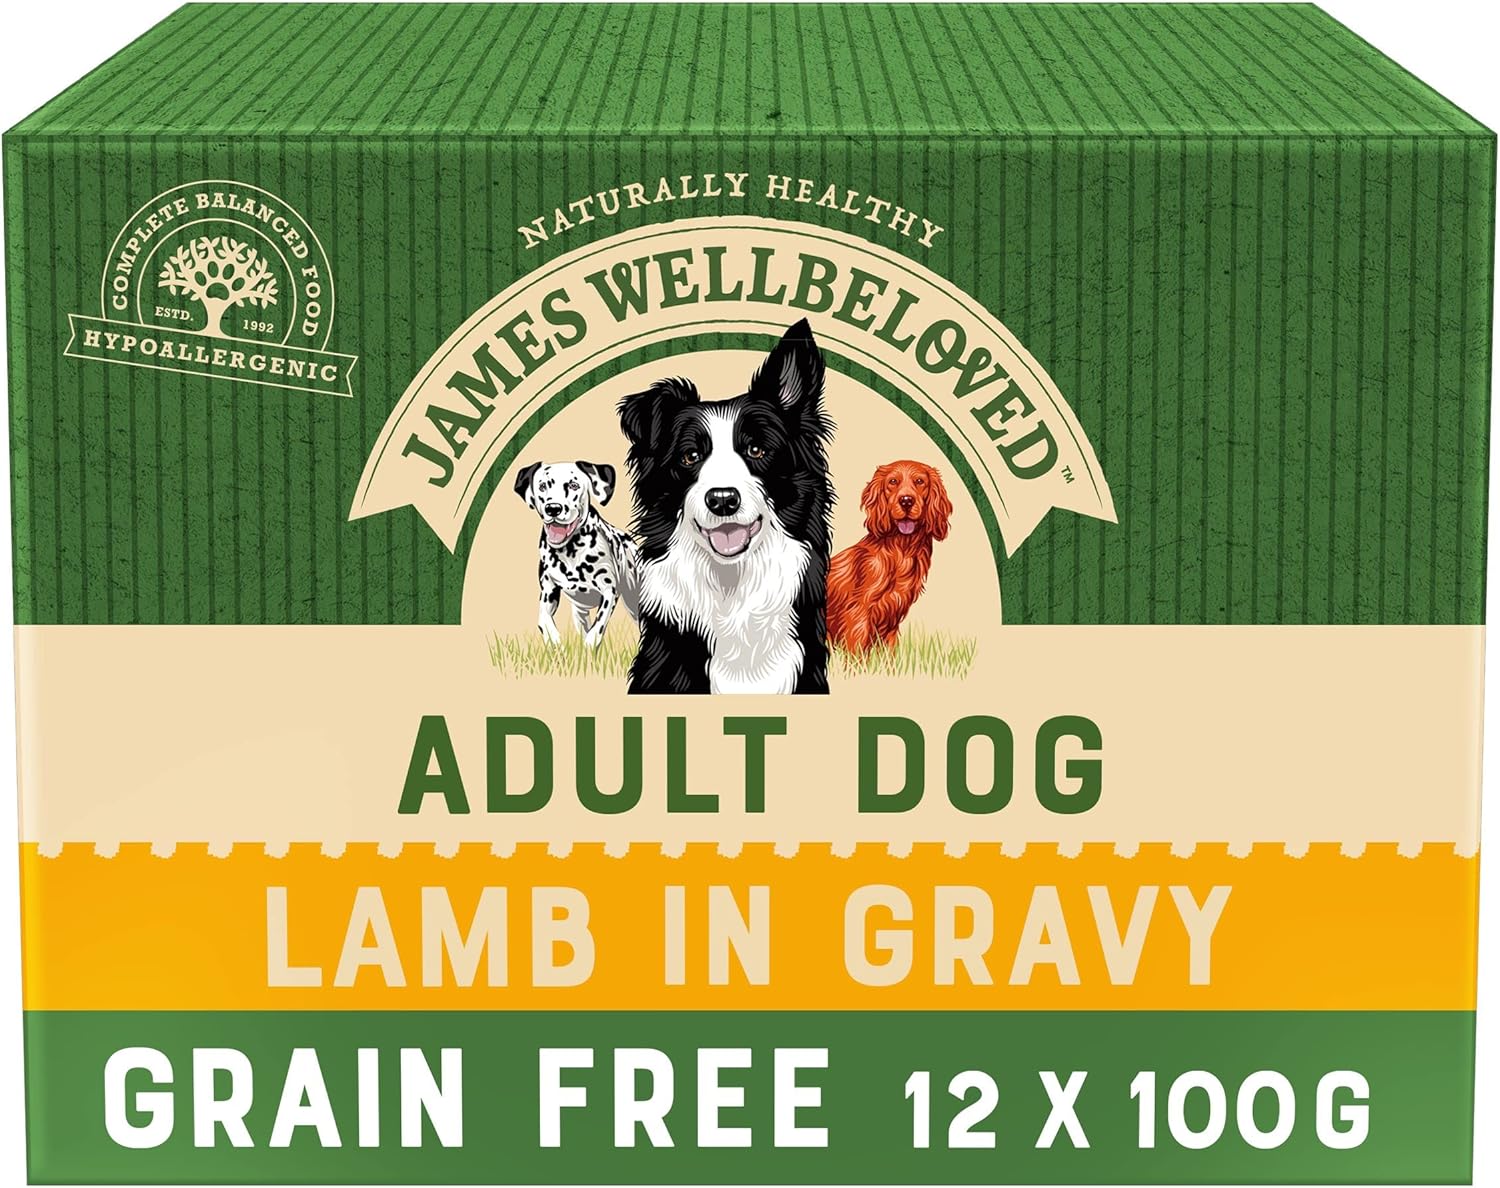 James Wellbeloved Adult Grain-Free Lamb in Gravy 12 Pouches, Hypoallergenic Wet Dog Food, Pack of 1 (12x100 g)?9003579006290